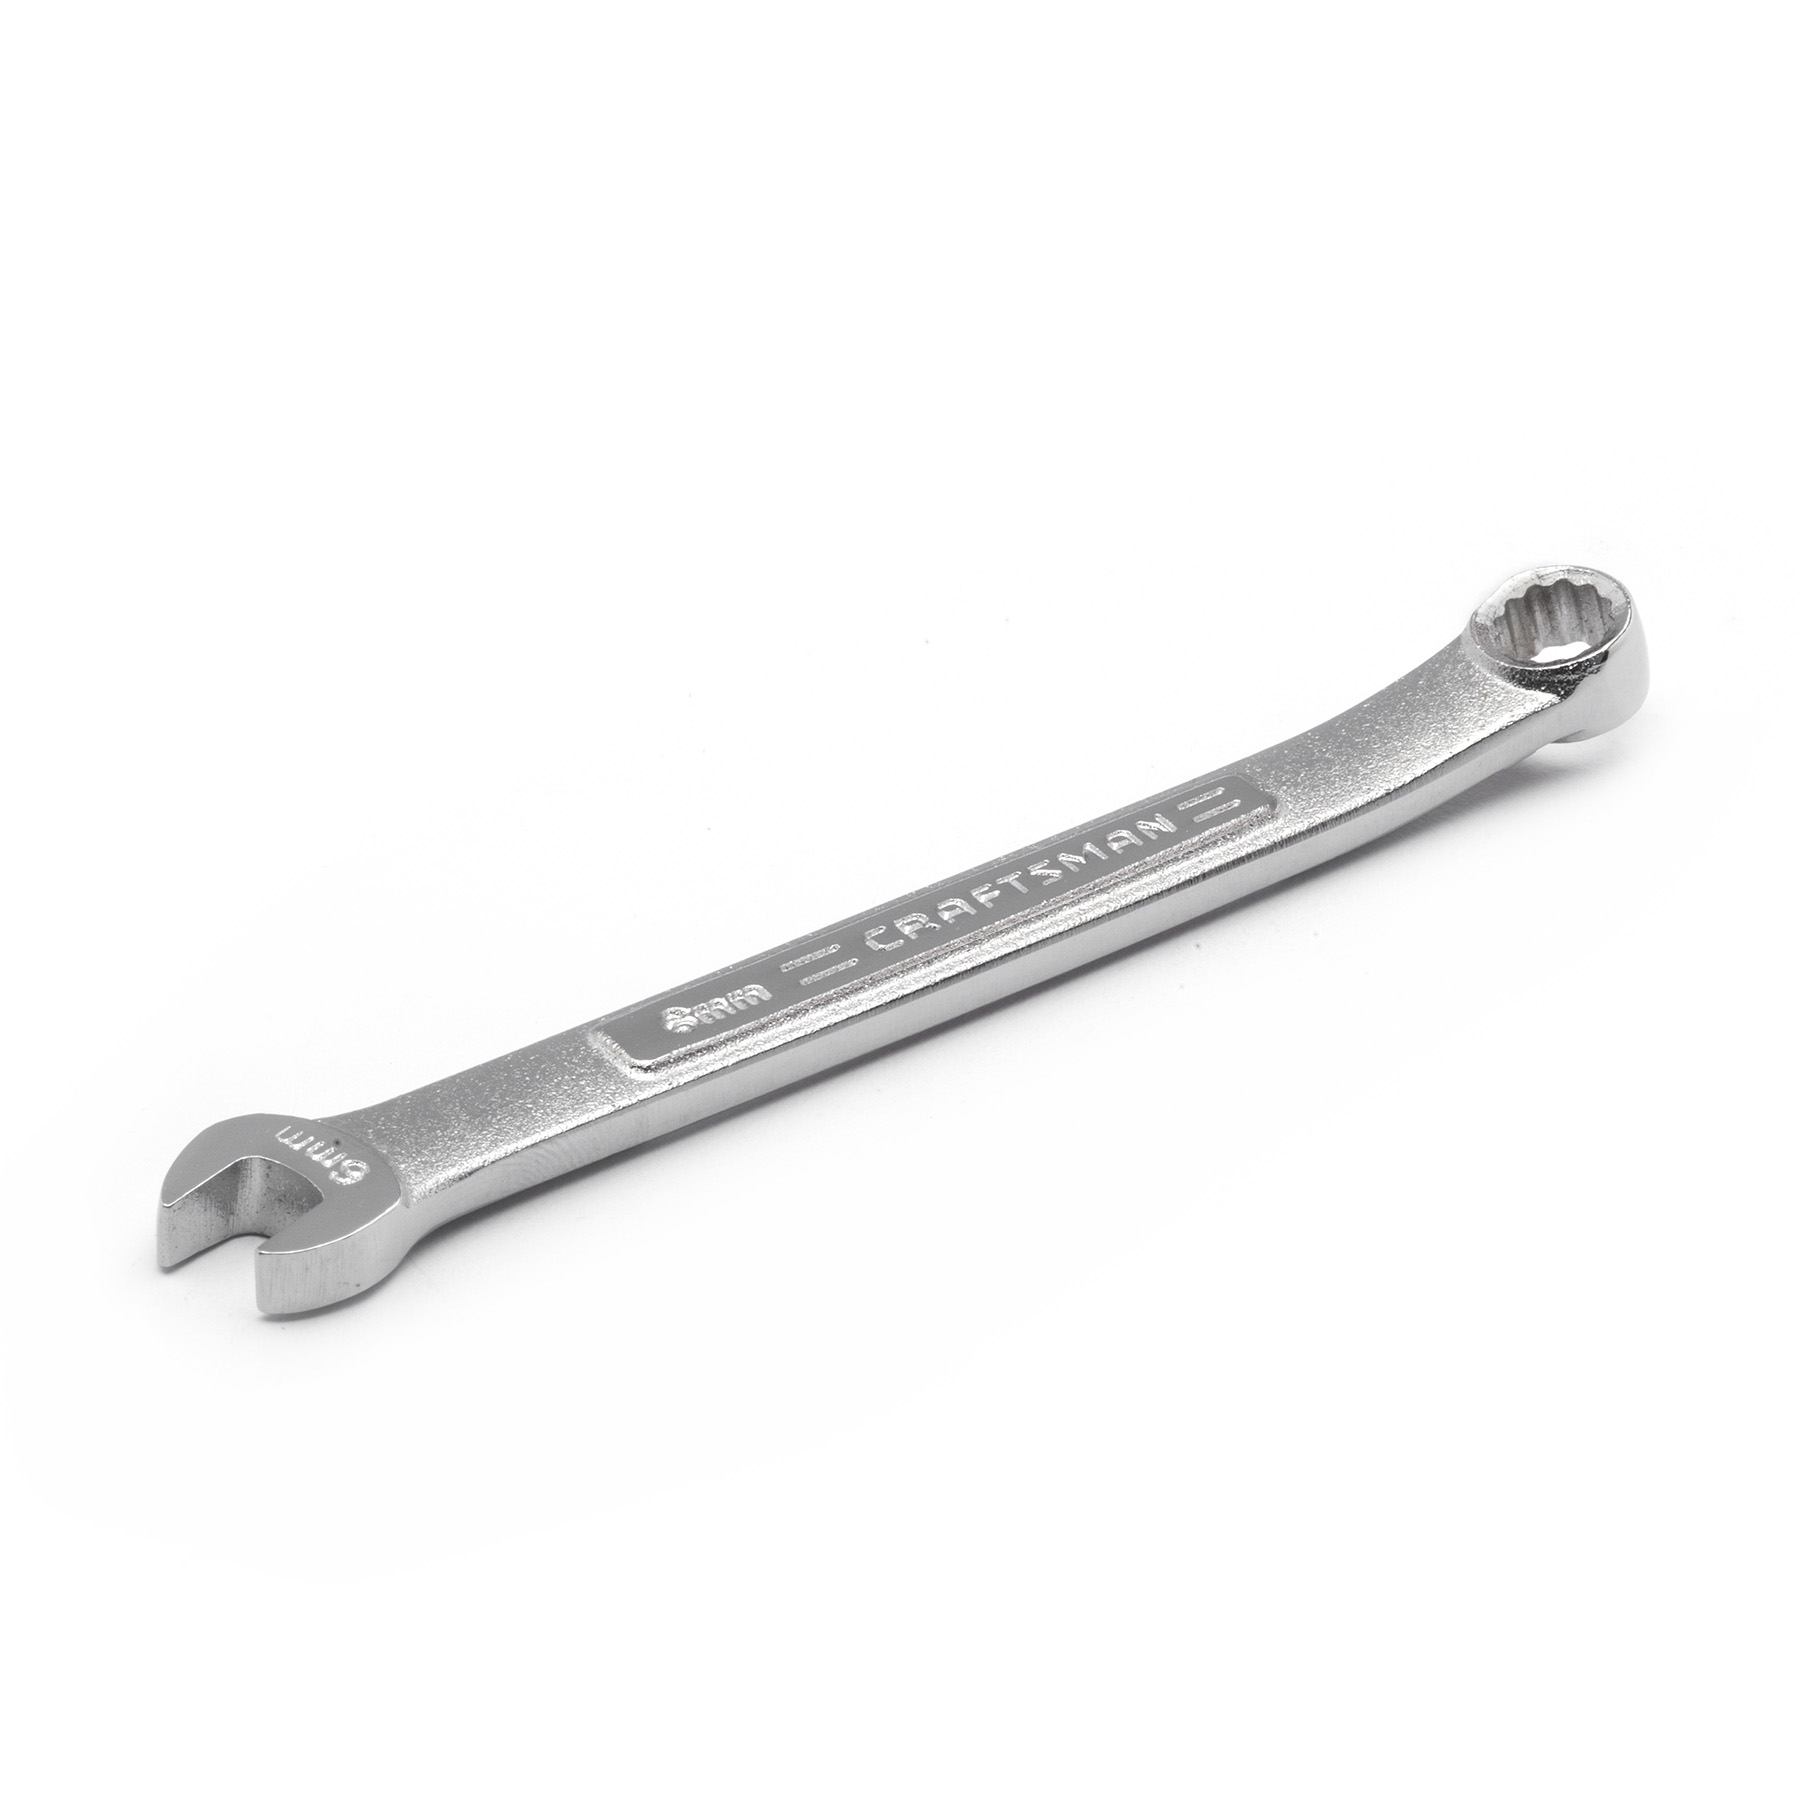 Craftsman 6mm 12 pt. Combination Wrench